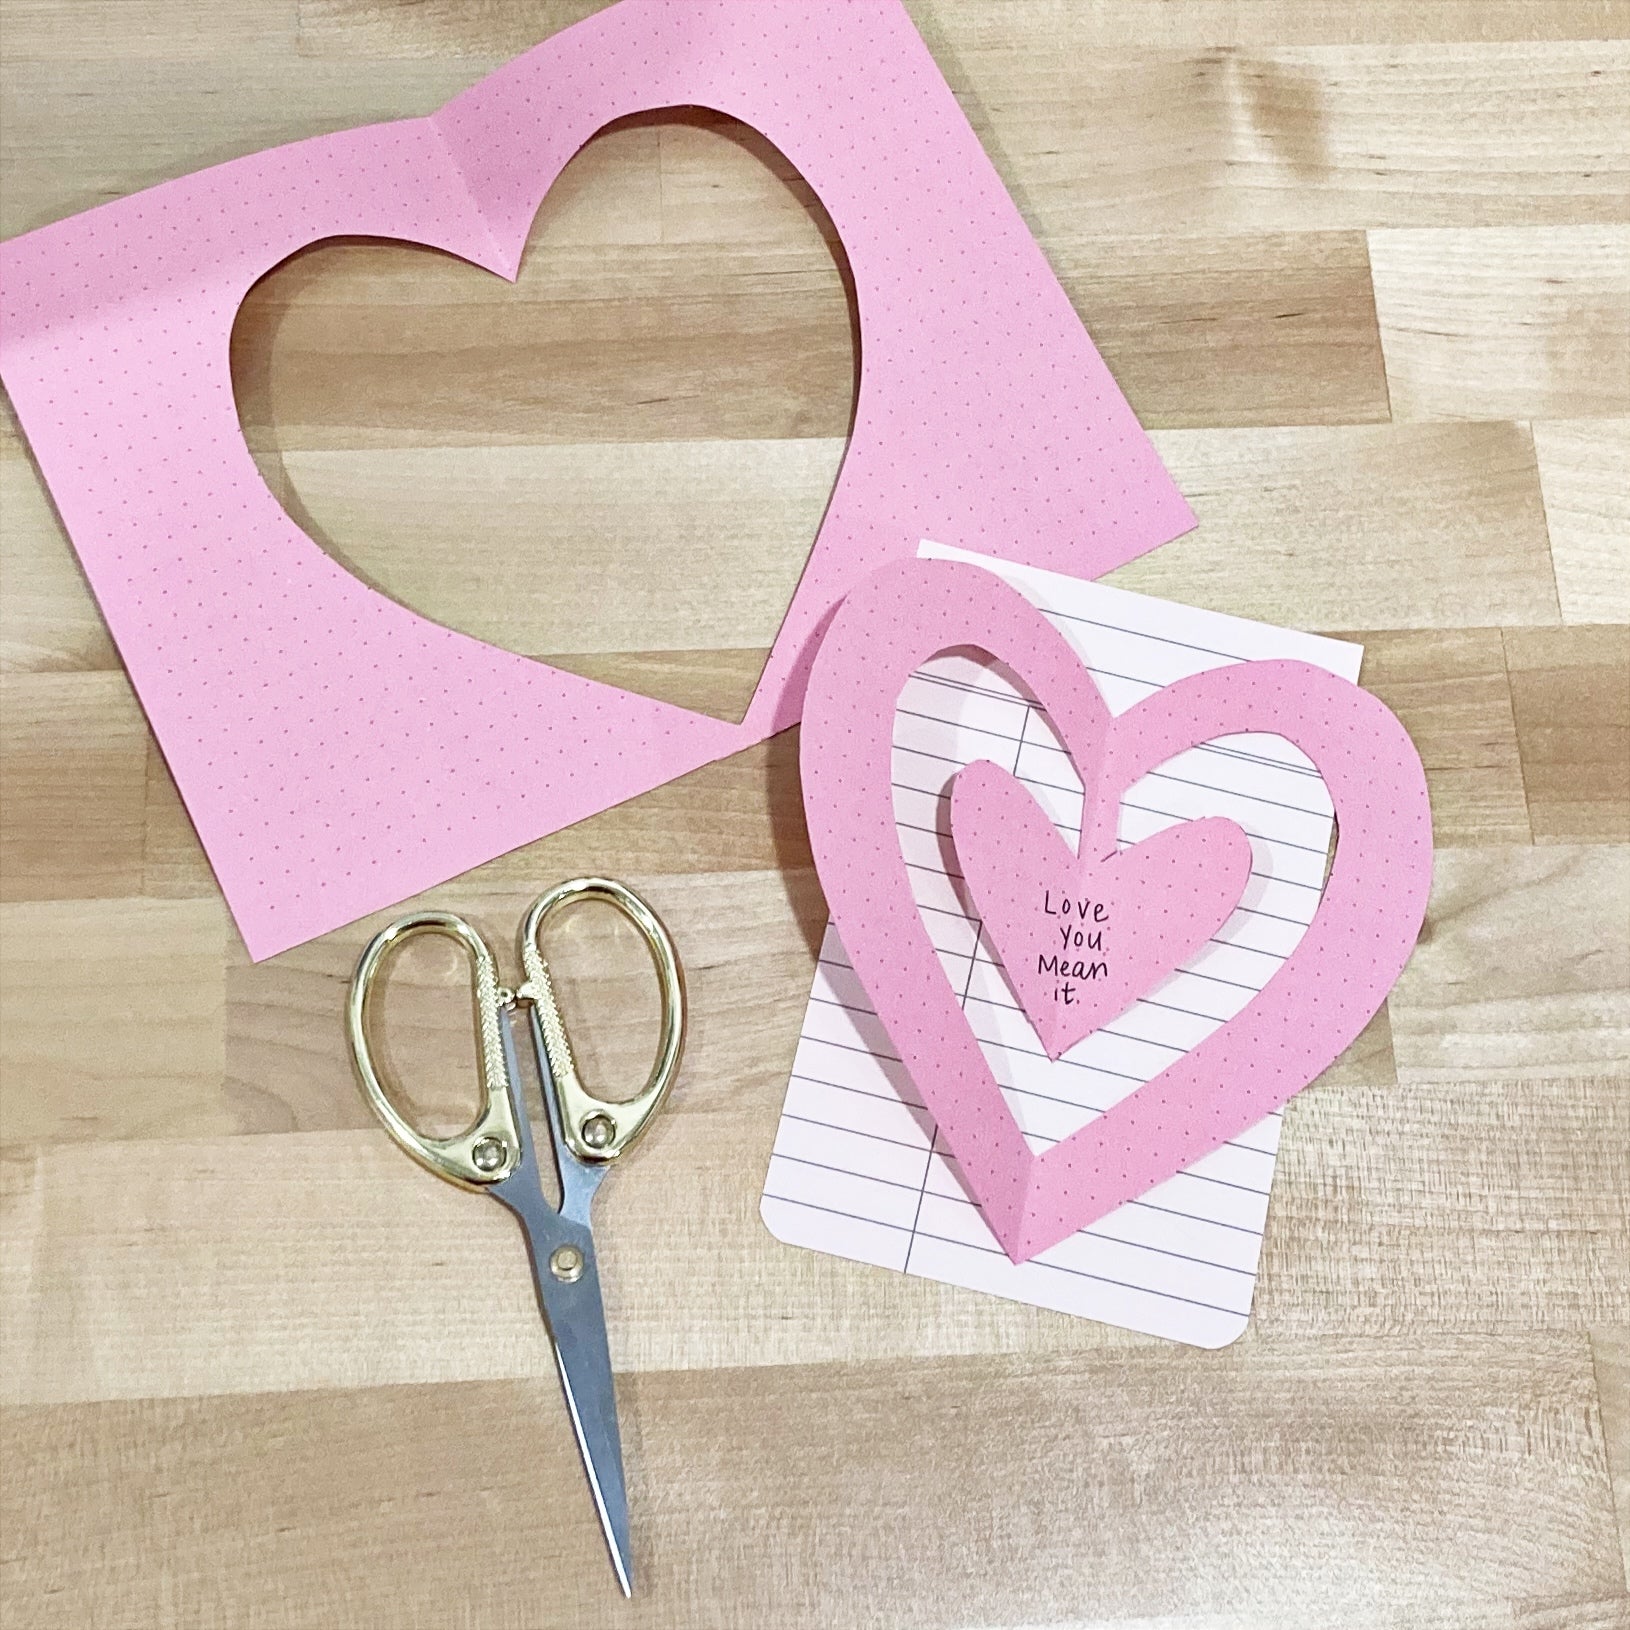 Two nested hearts cut out of paper